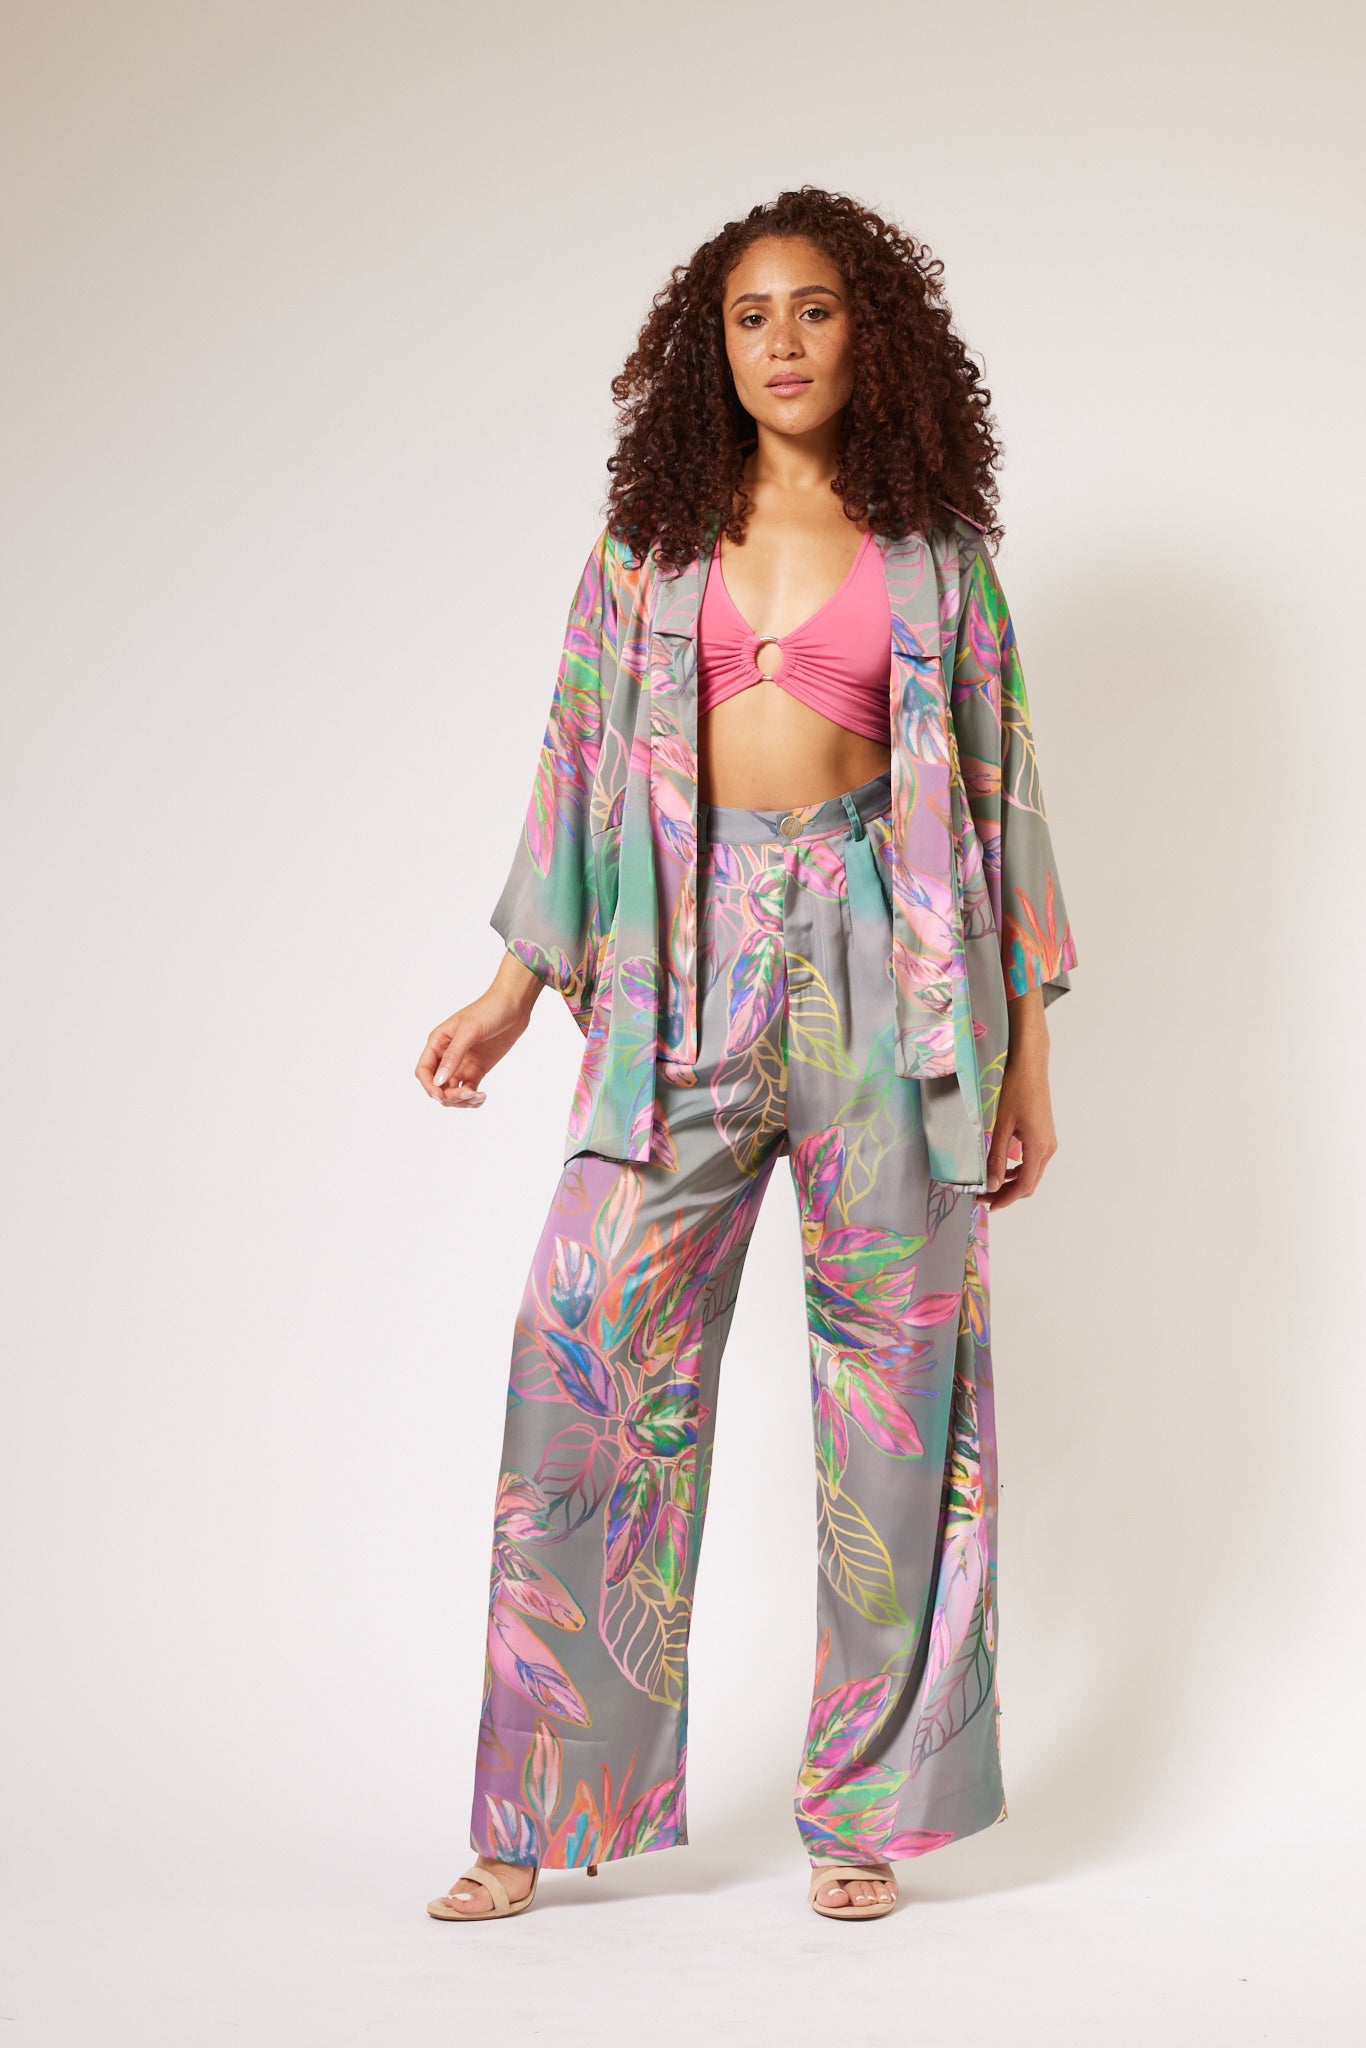 woman modelling all over multicolored tropical print kimono duster and matching yacht slacks made with recycled textiles